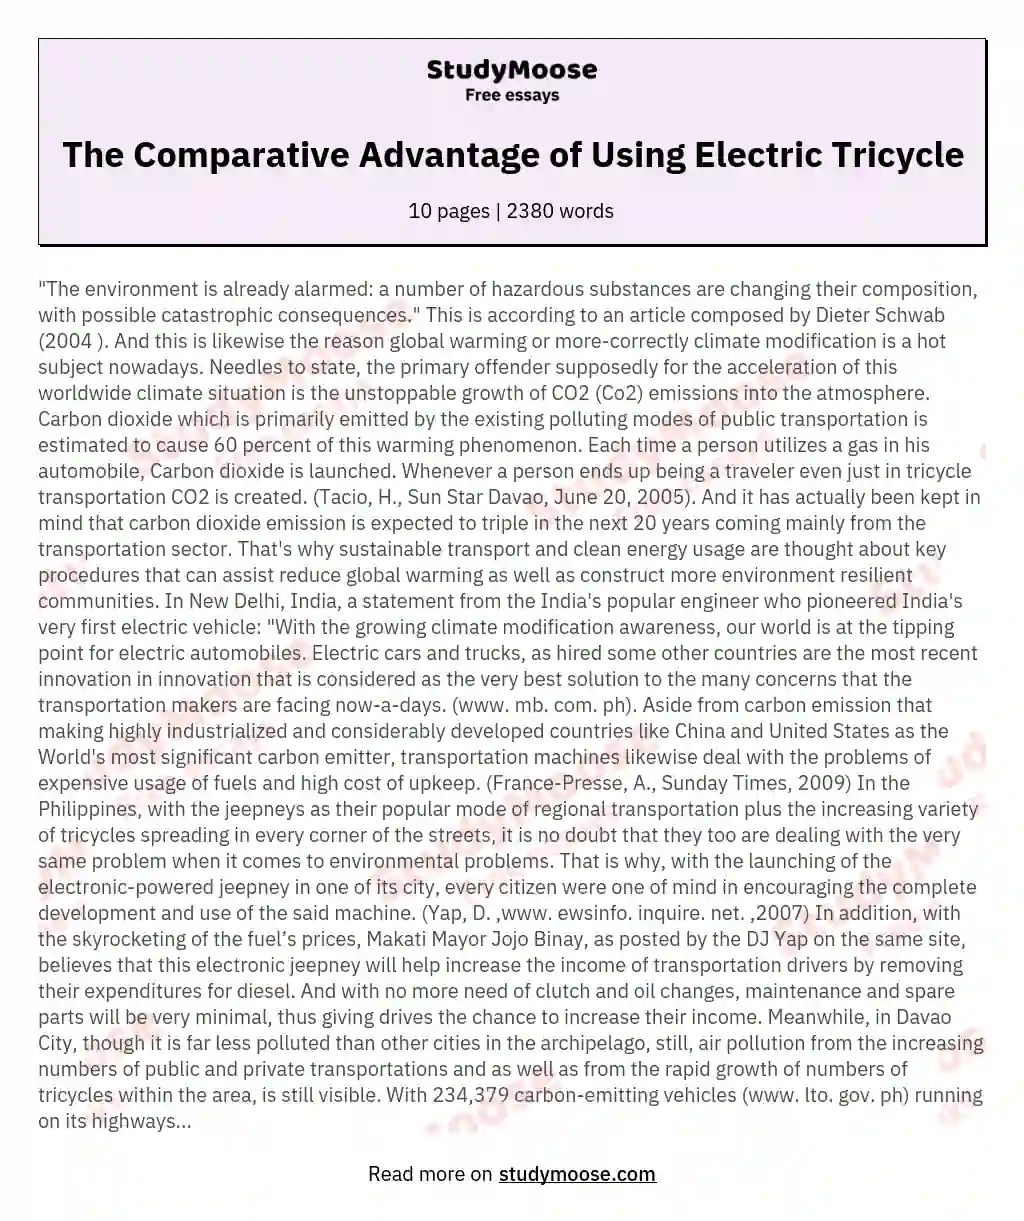 The Comparative Advantage of Using Electric Tricycle essay